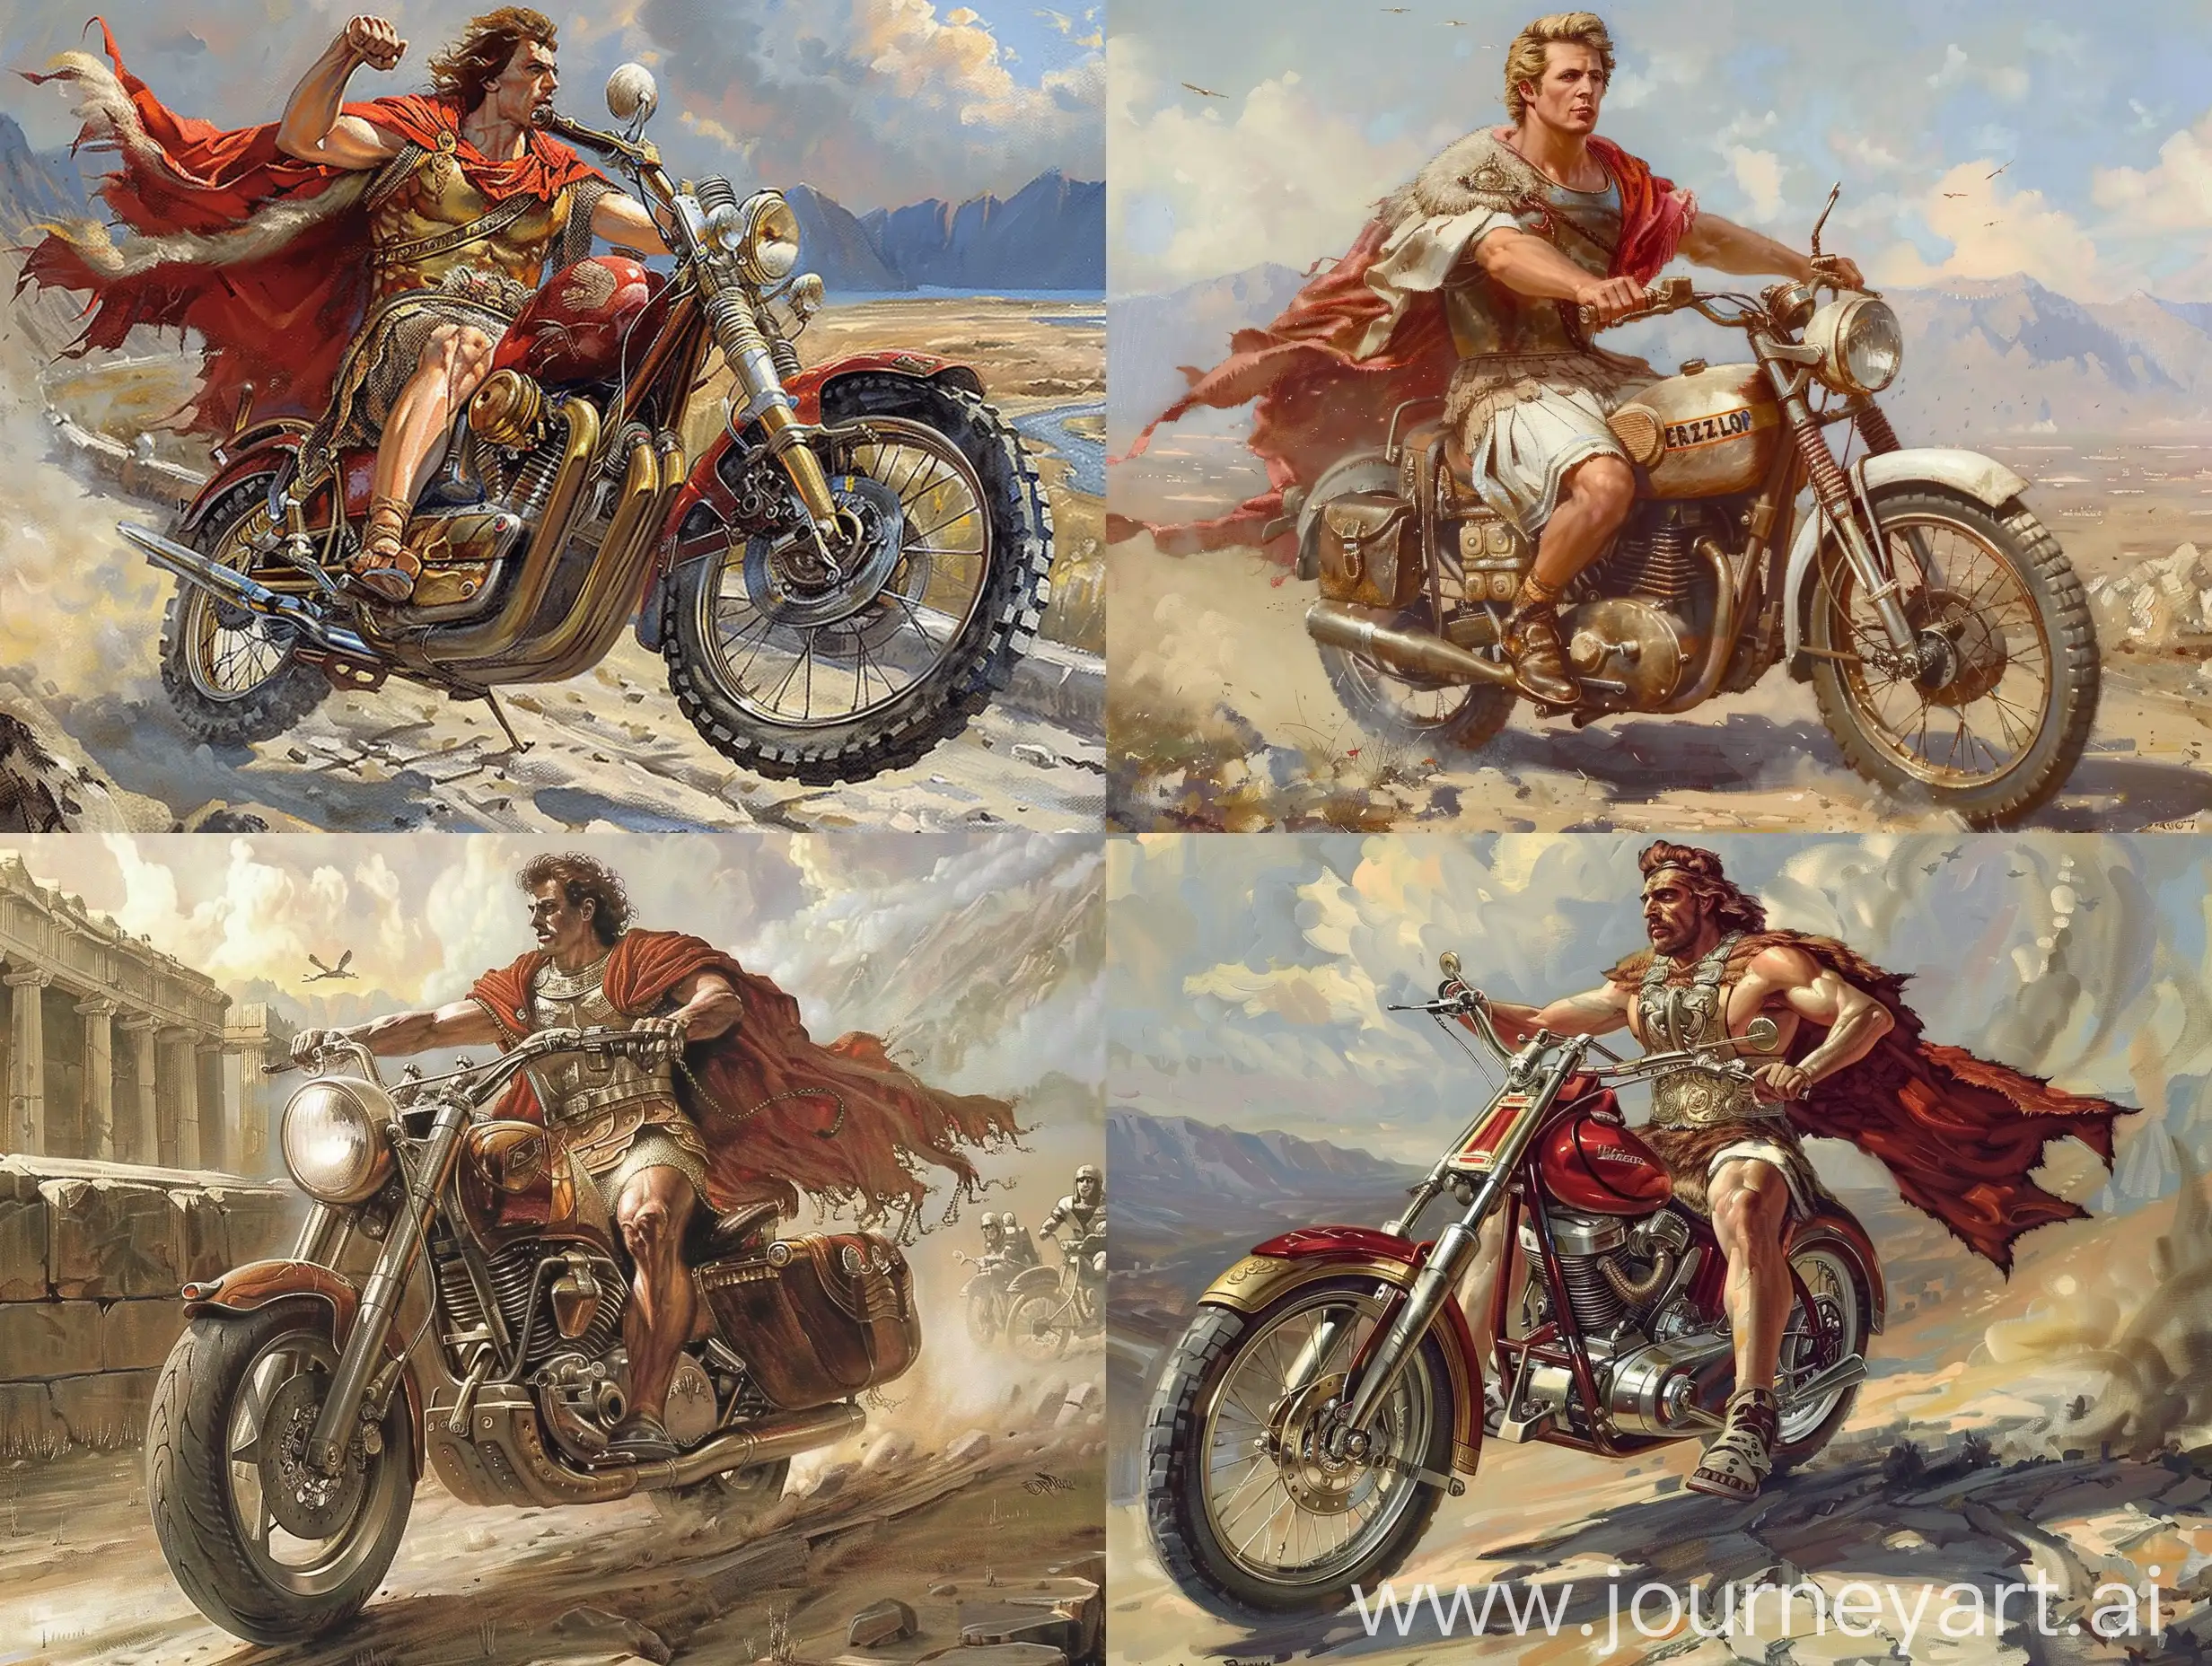 Alexander-the-Great-Riding-a-Motorcycle-in-Vintage-Style